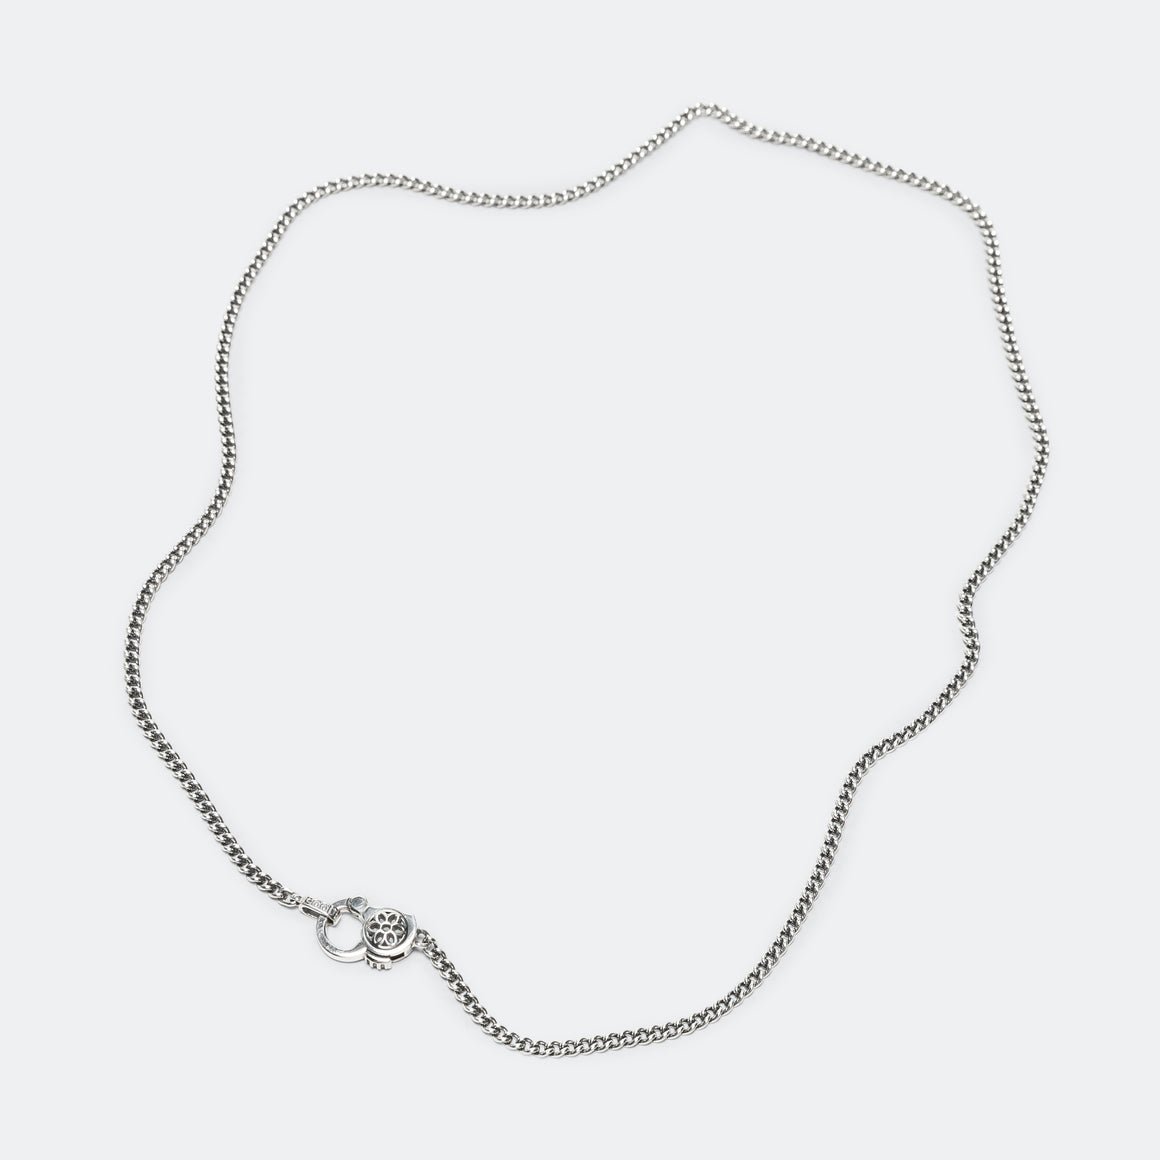 Good Art Hlywd - Curb Chain Necklace - 4A - 925 Silver - UP THERE